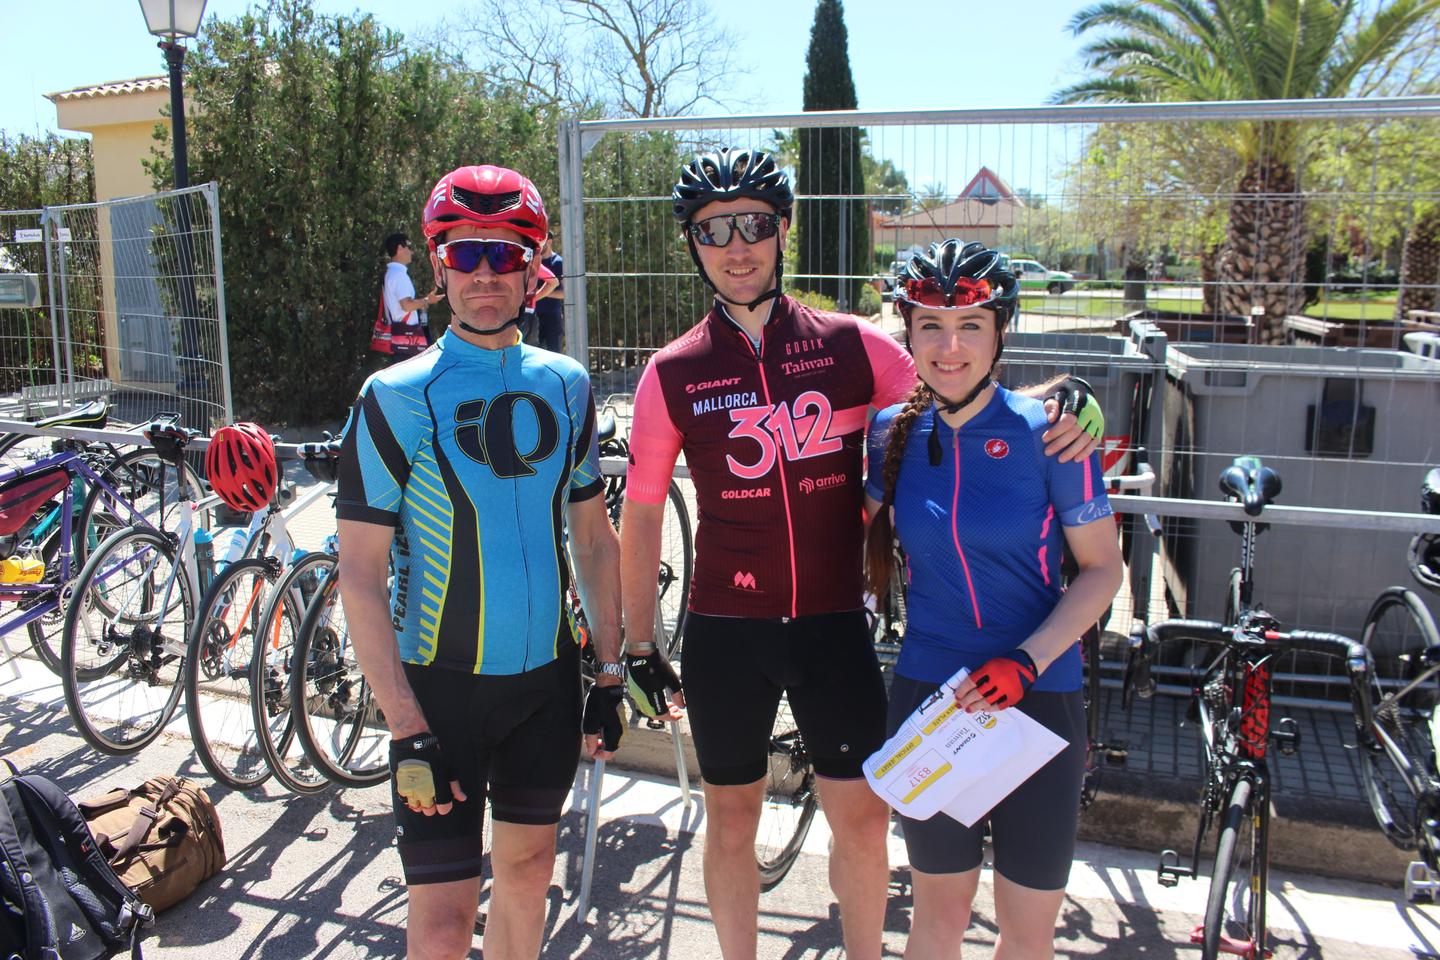 Three cyclists posing for a photo at the Mallorca 312 event, wearing colorful jerseys and helmets, with bicycles in the background.